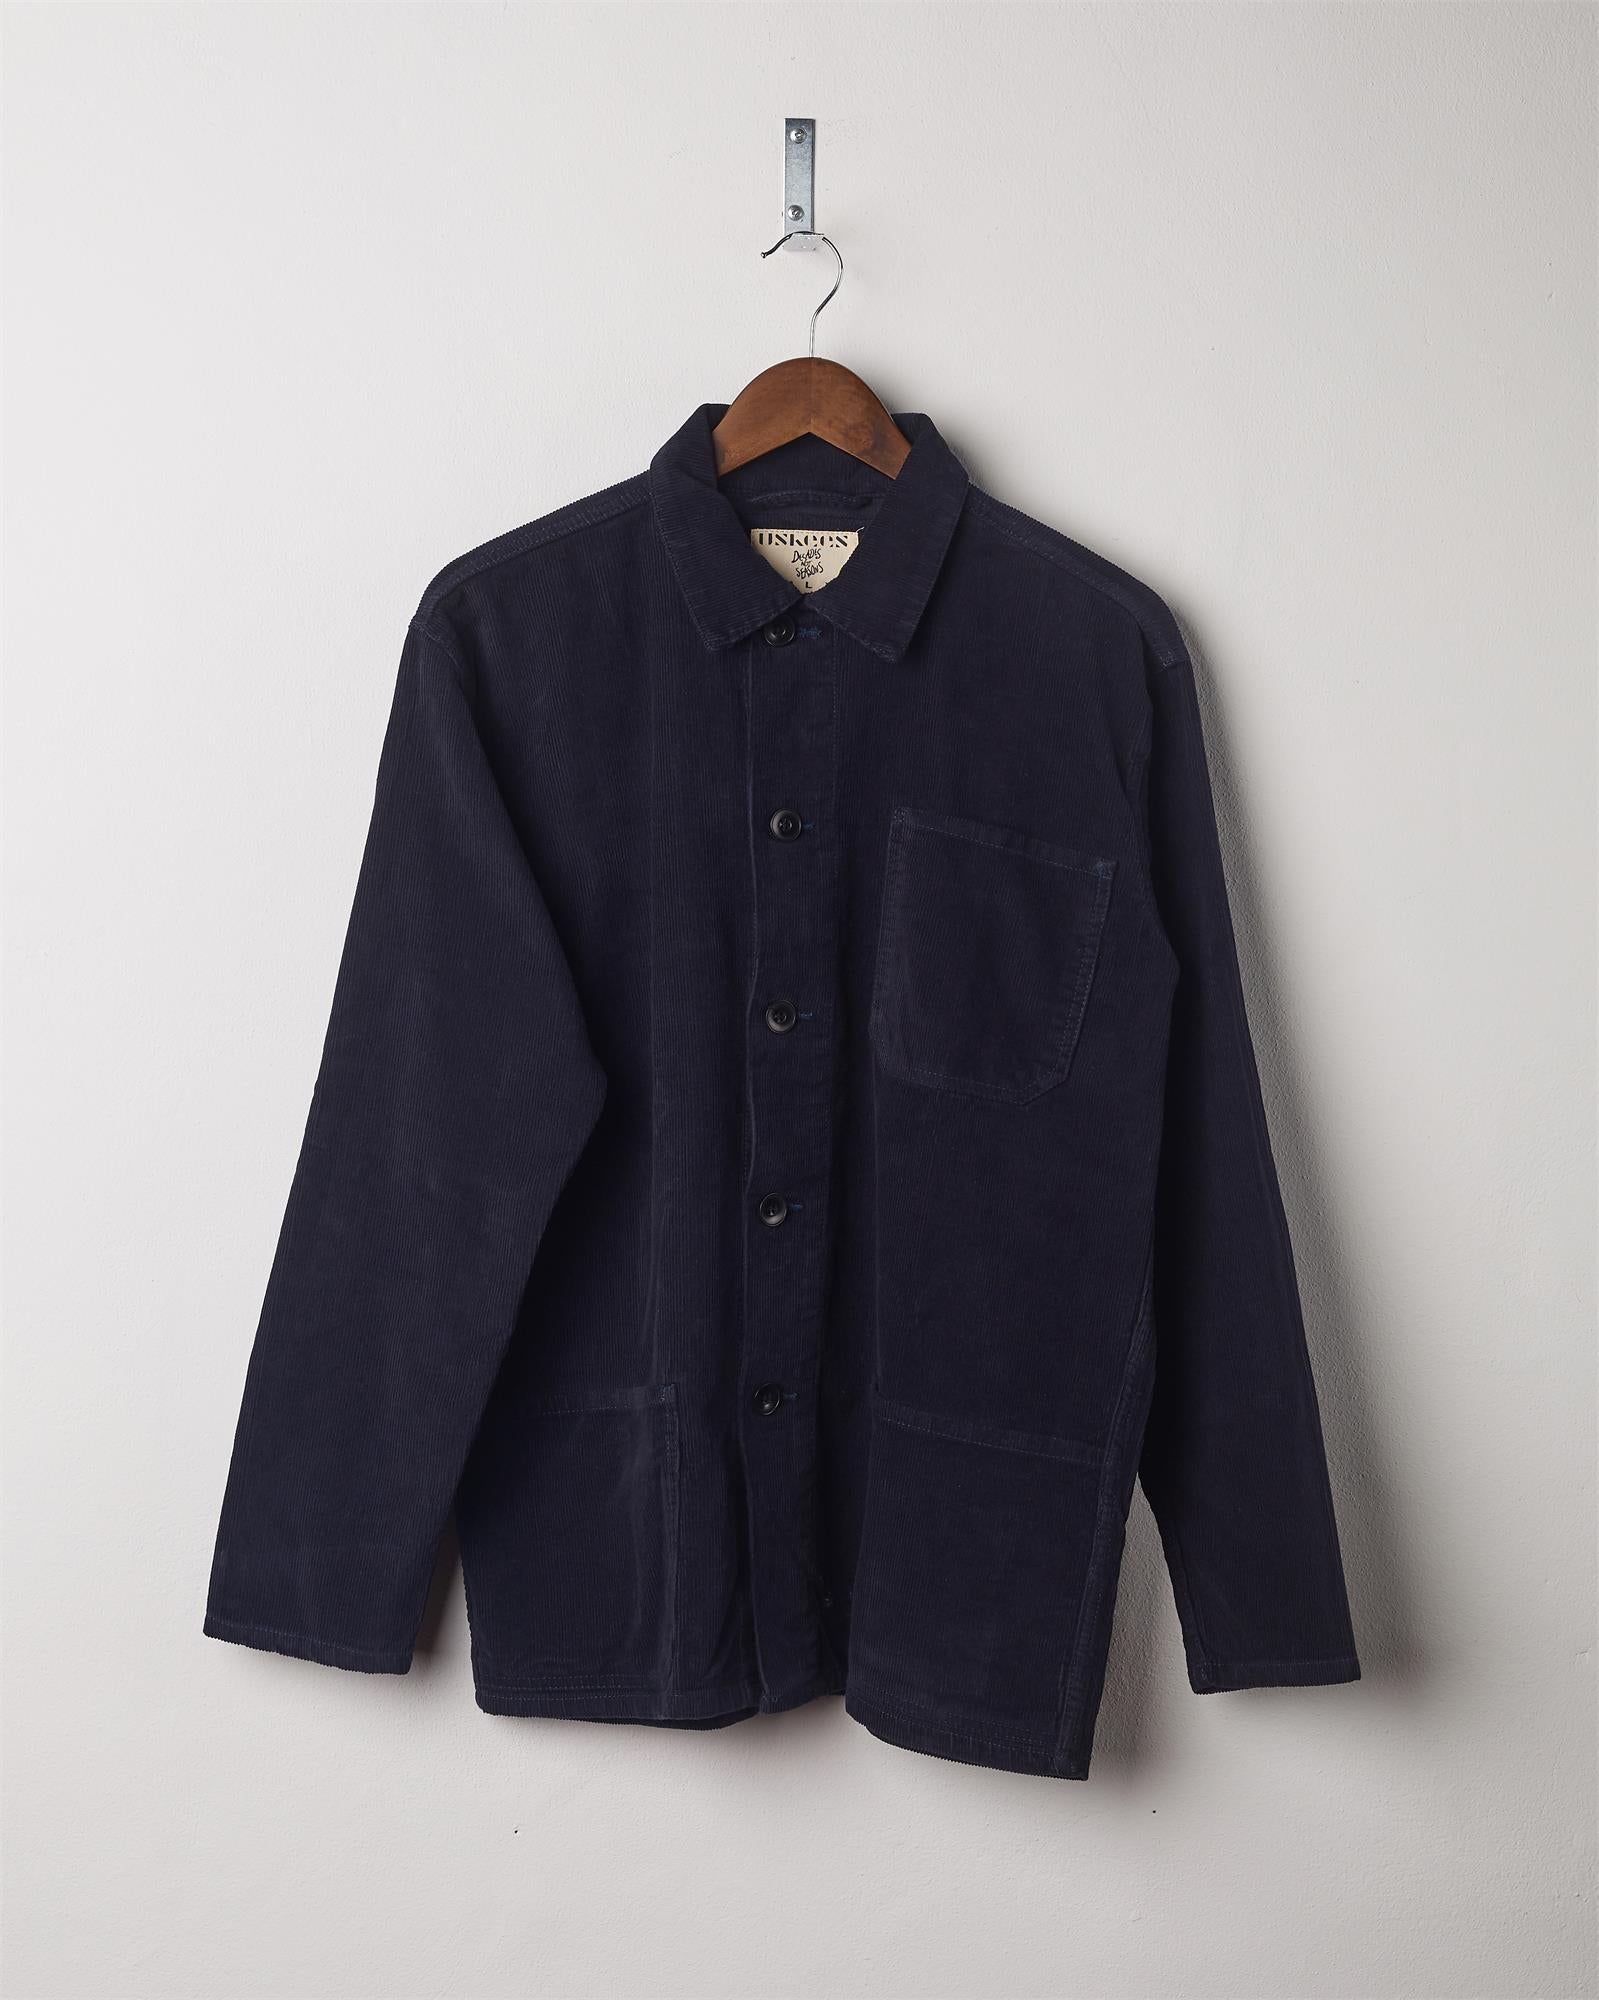 Midnight blue coloured, buttoned corduroy overshirt from Uskees presented on hanger. Clear view of breast and hip pocket and corozo buttons.